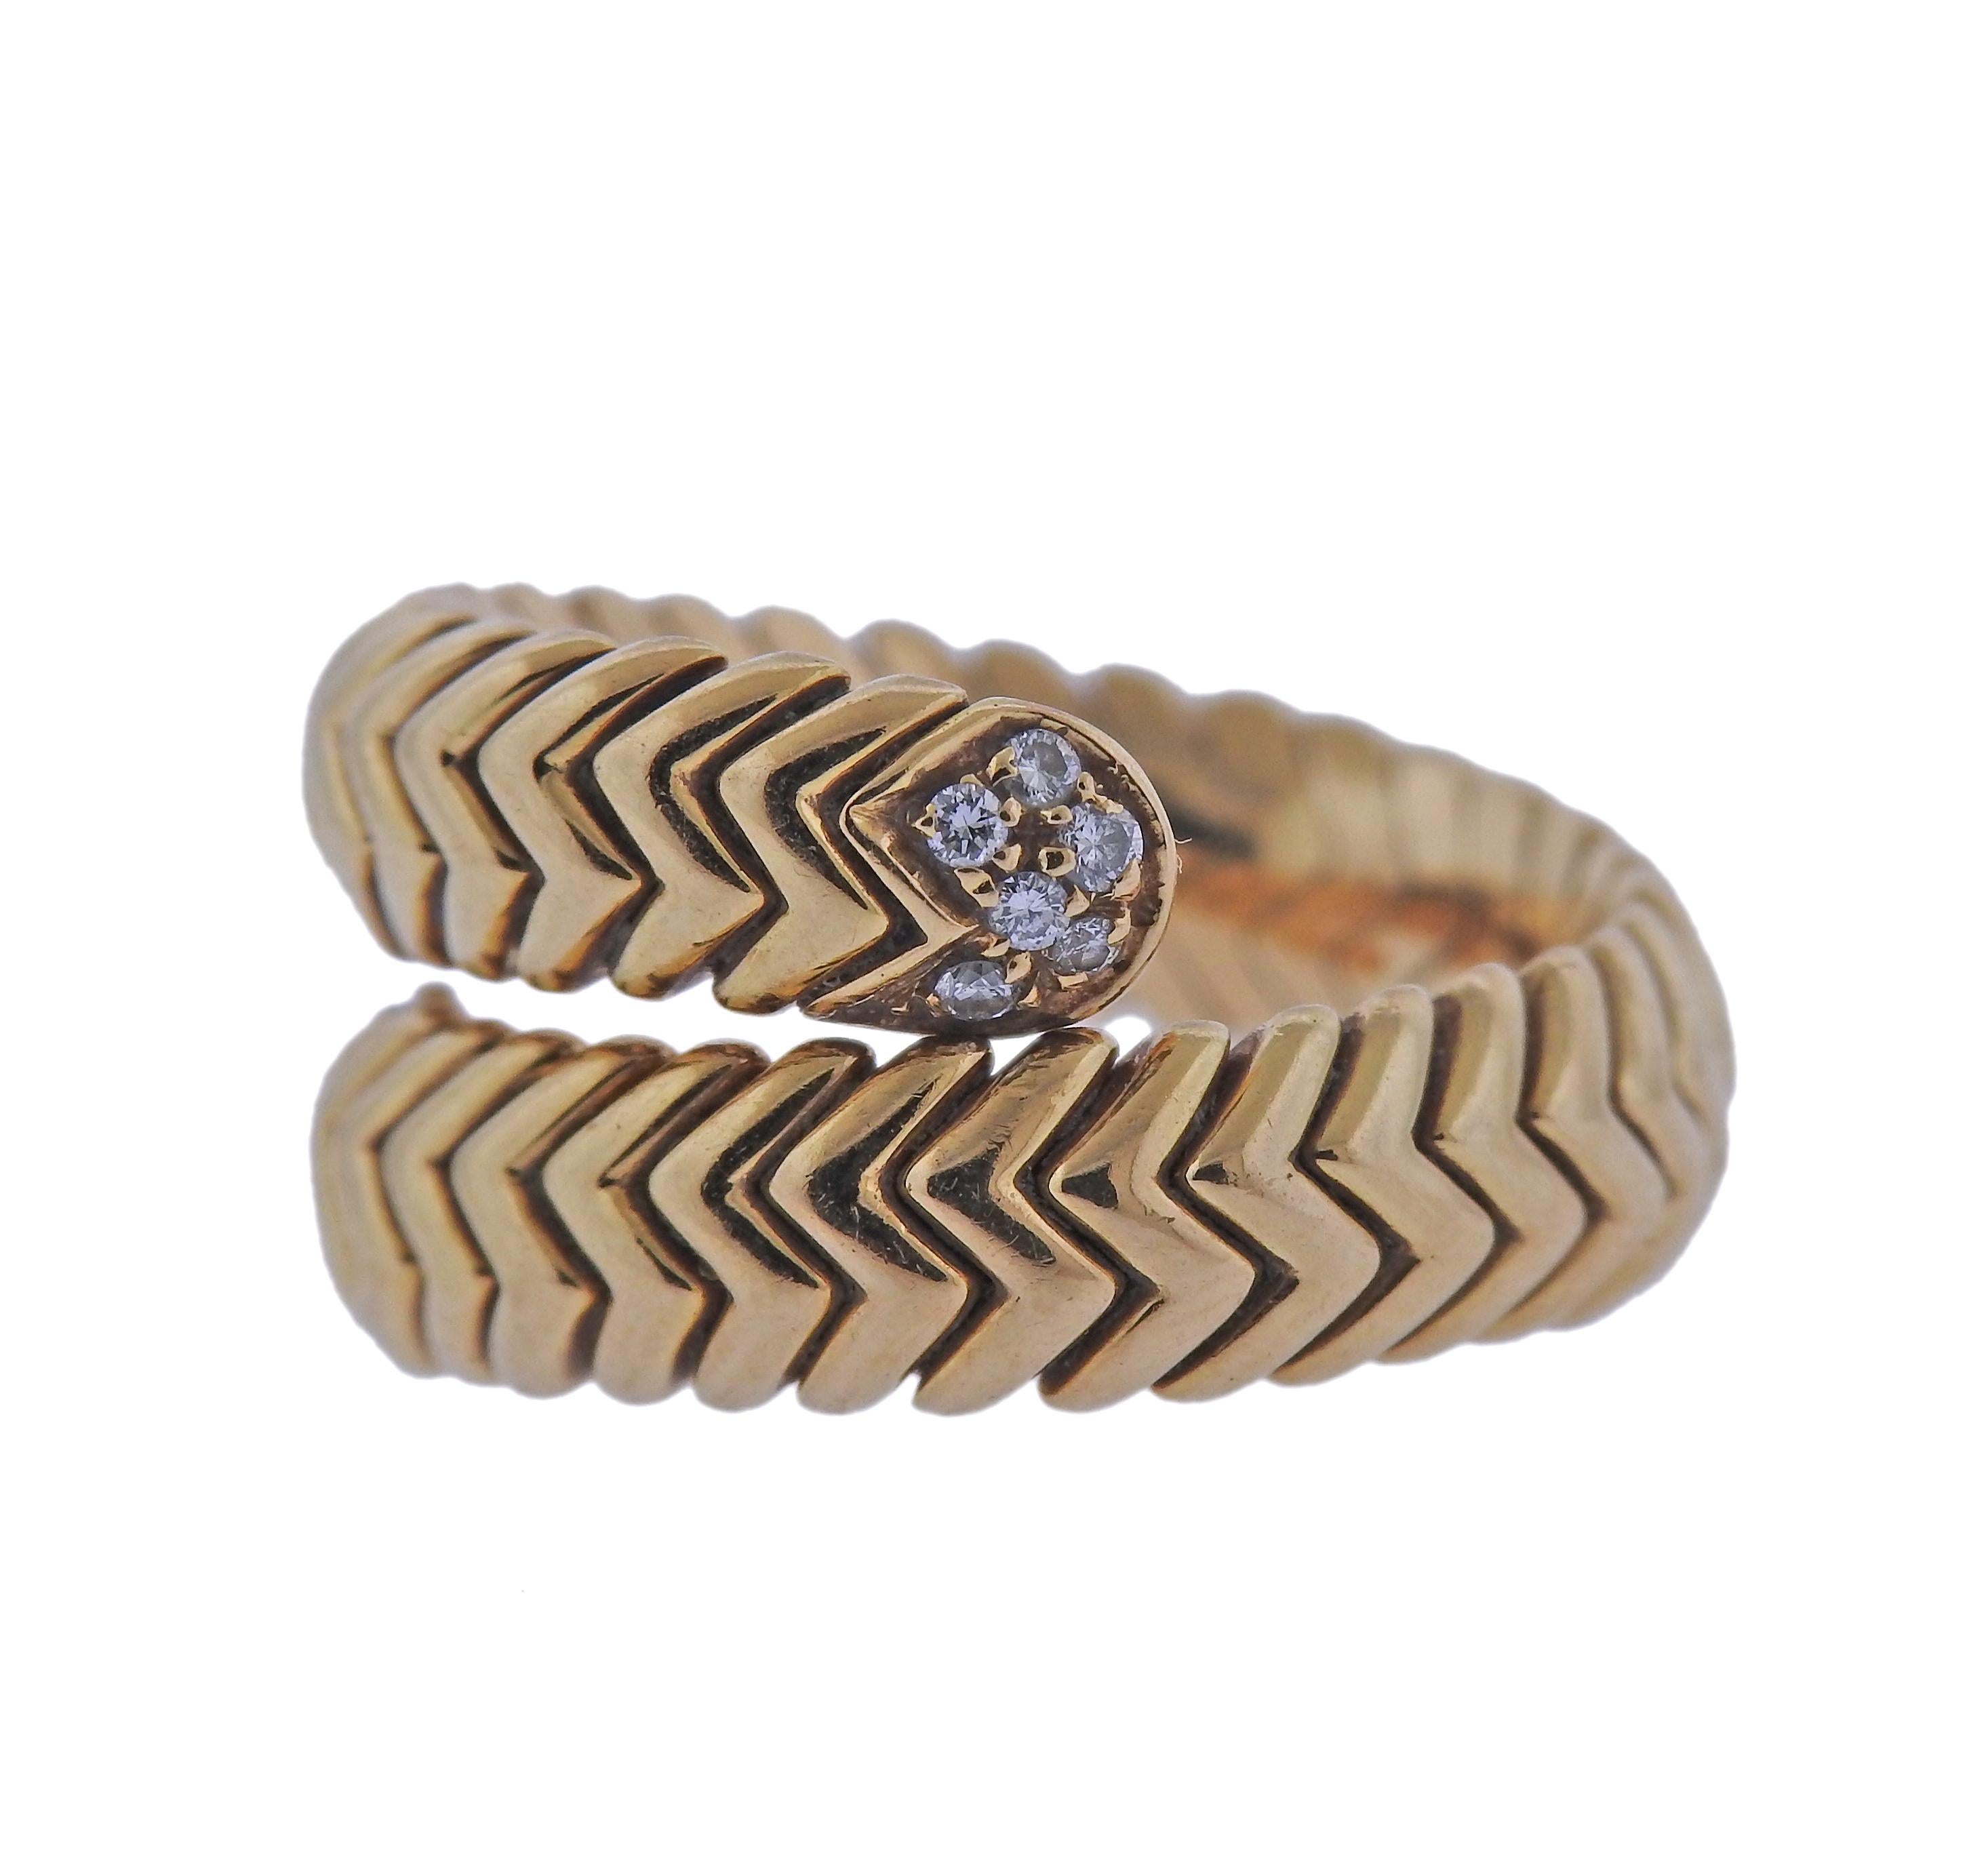 18k gold Spiga wrap ring by Bvlgari, adorned with approx. 012ctw in G/VS diamonds.  Ring size - 6,.25 ring is 12mm wide. Weight - 13.2 grams. Marked: Bvlgari, Italian mark, 750, made in Italy. 